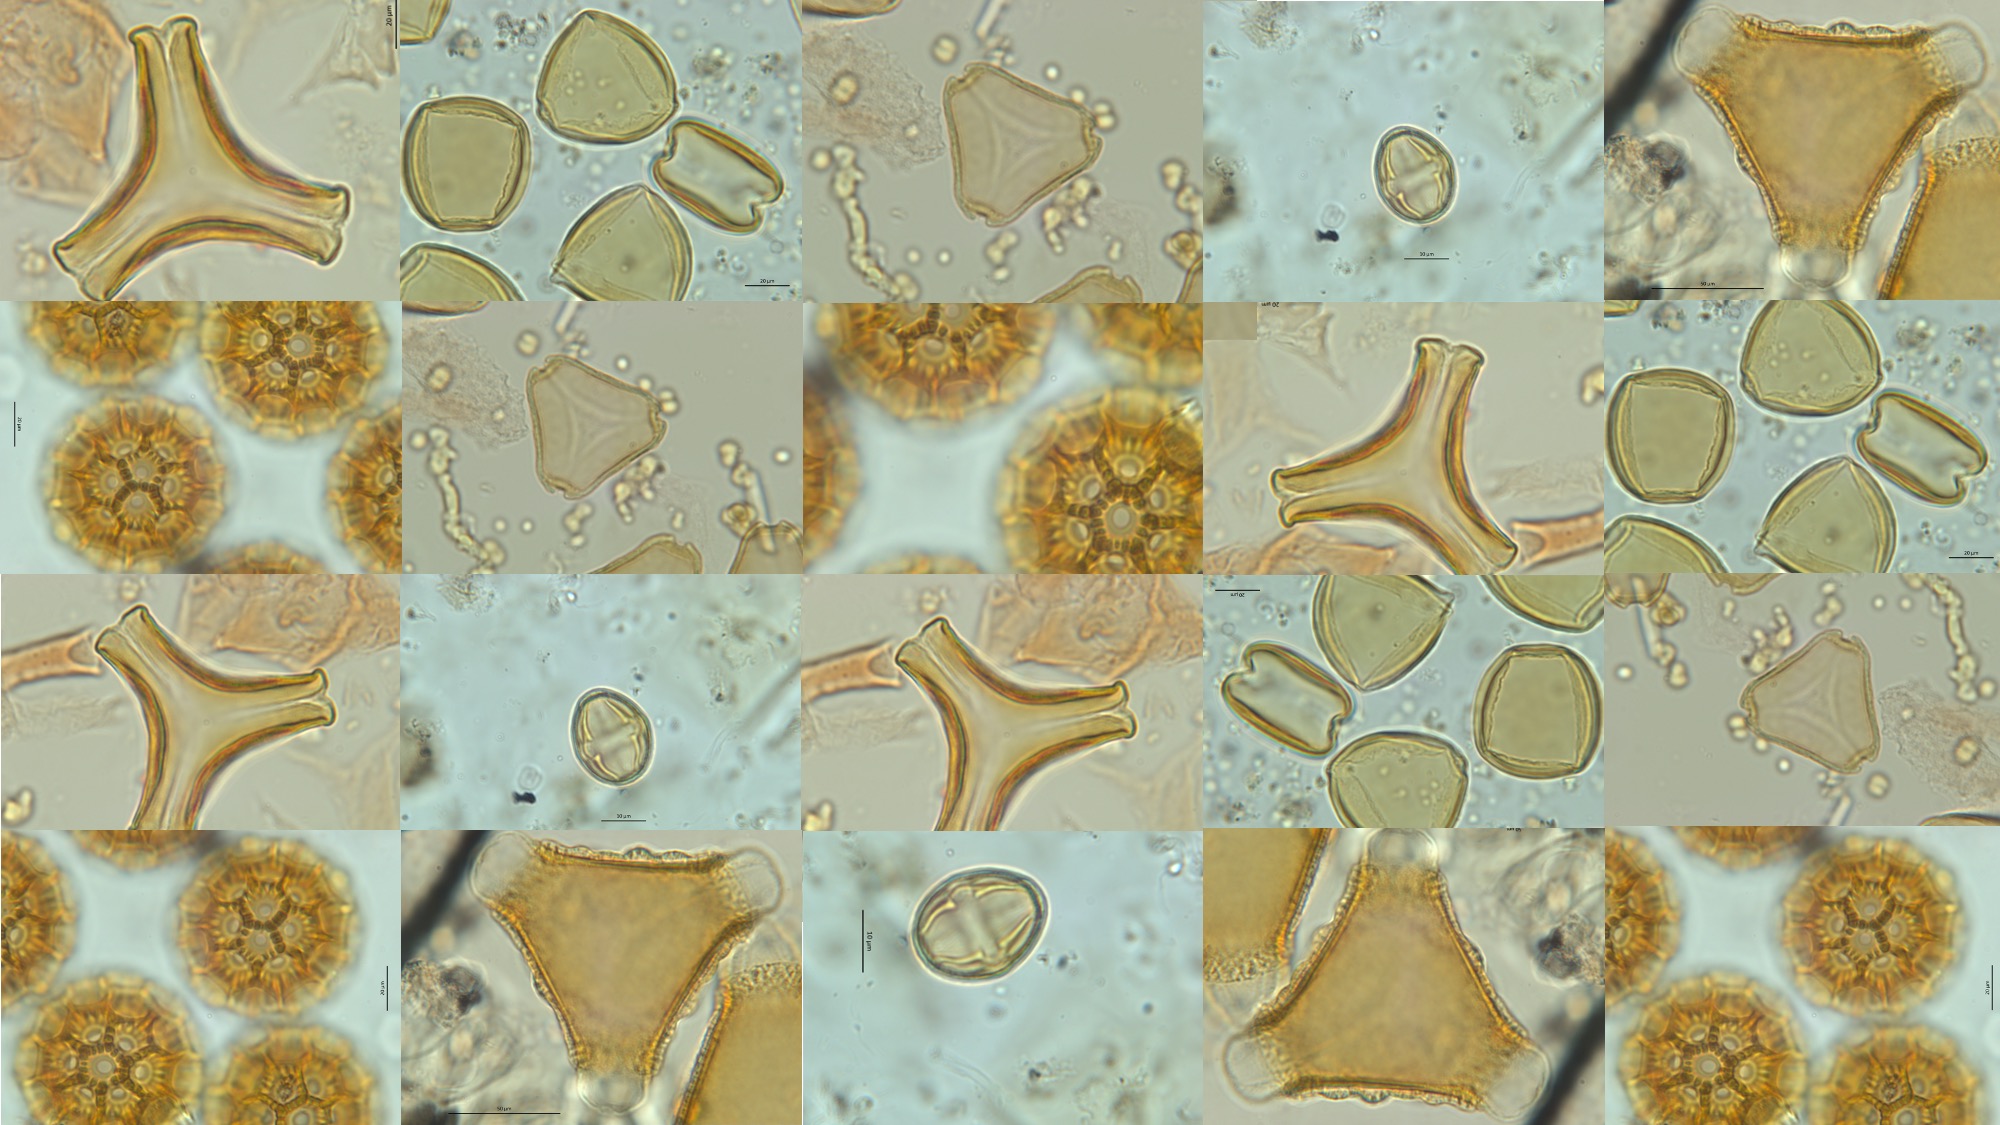 Image collage of pollen under microscope